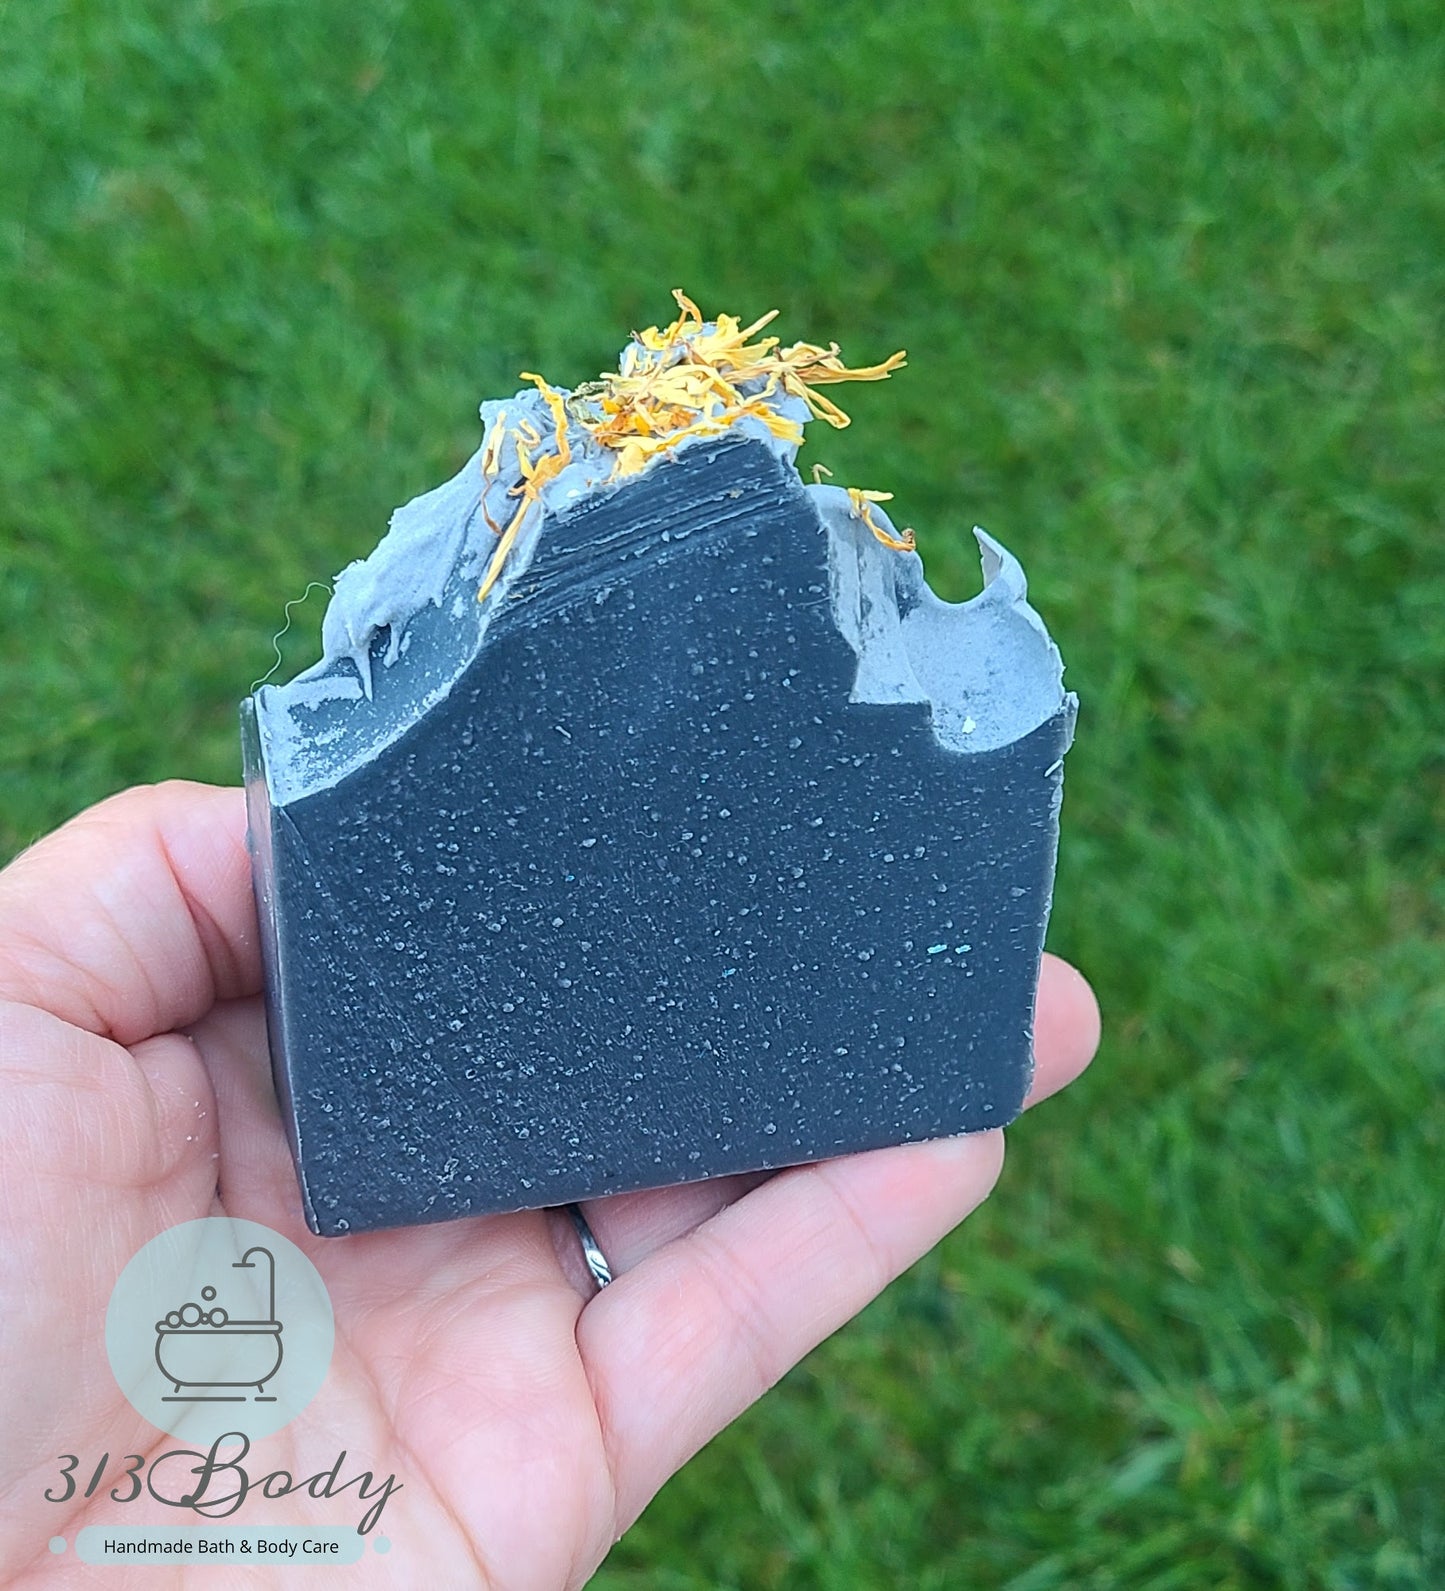 Activated Charcoal Handmade Soap with Tea Tree Essential Oil - Face and Body Soap